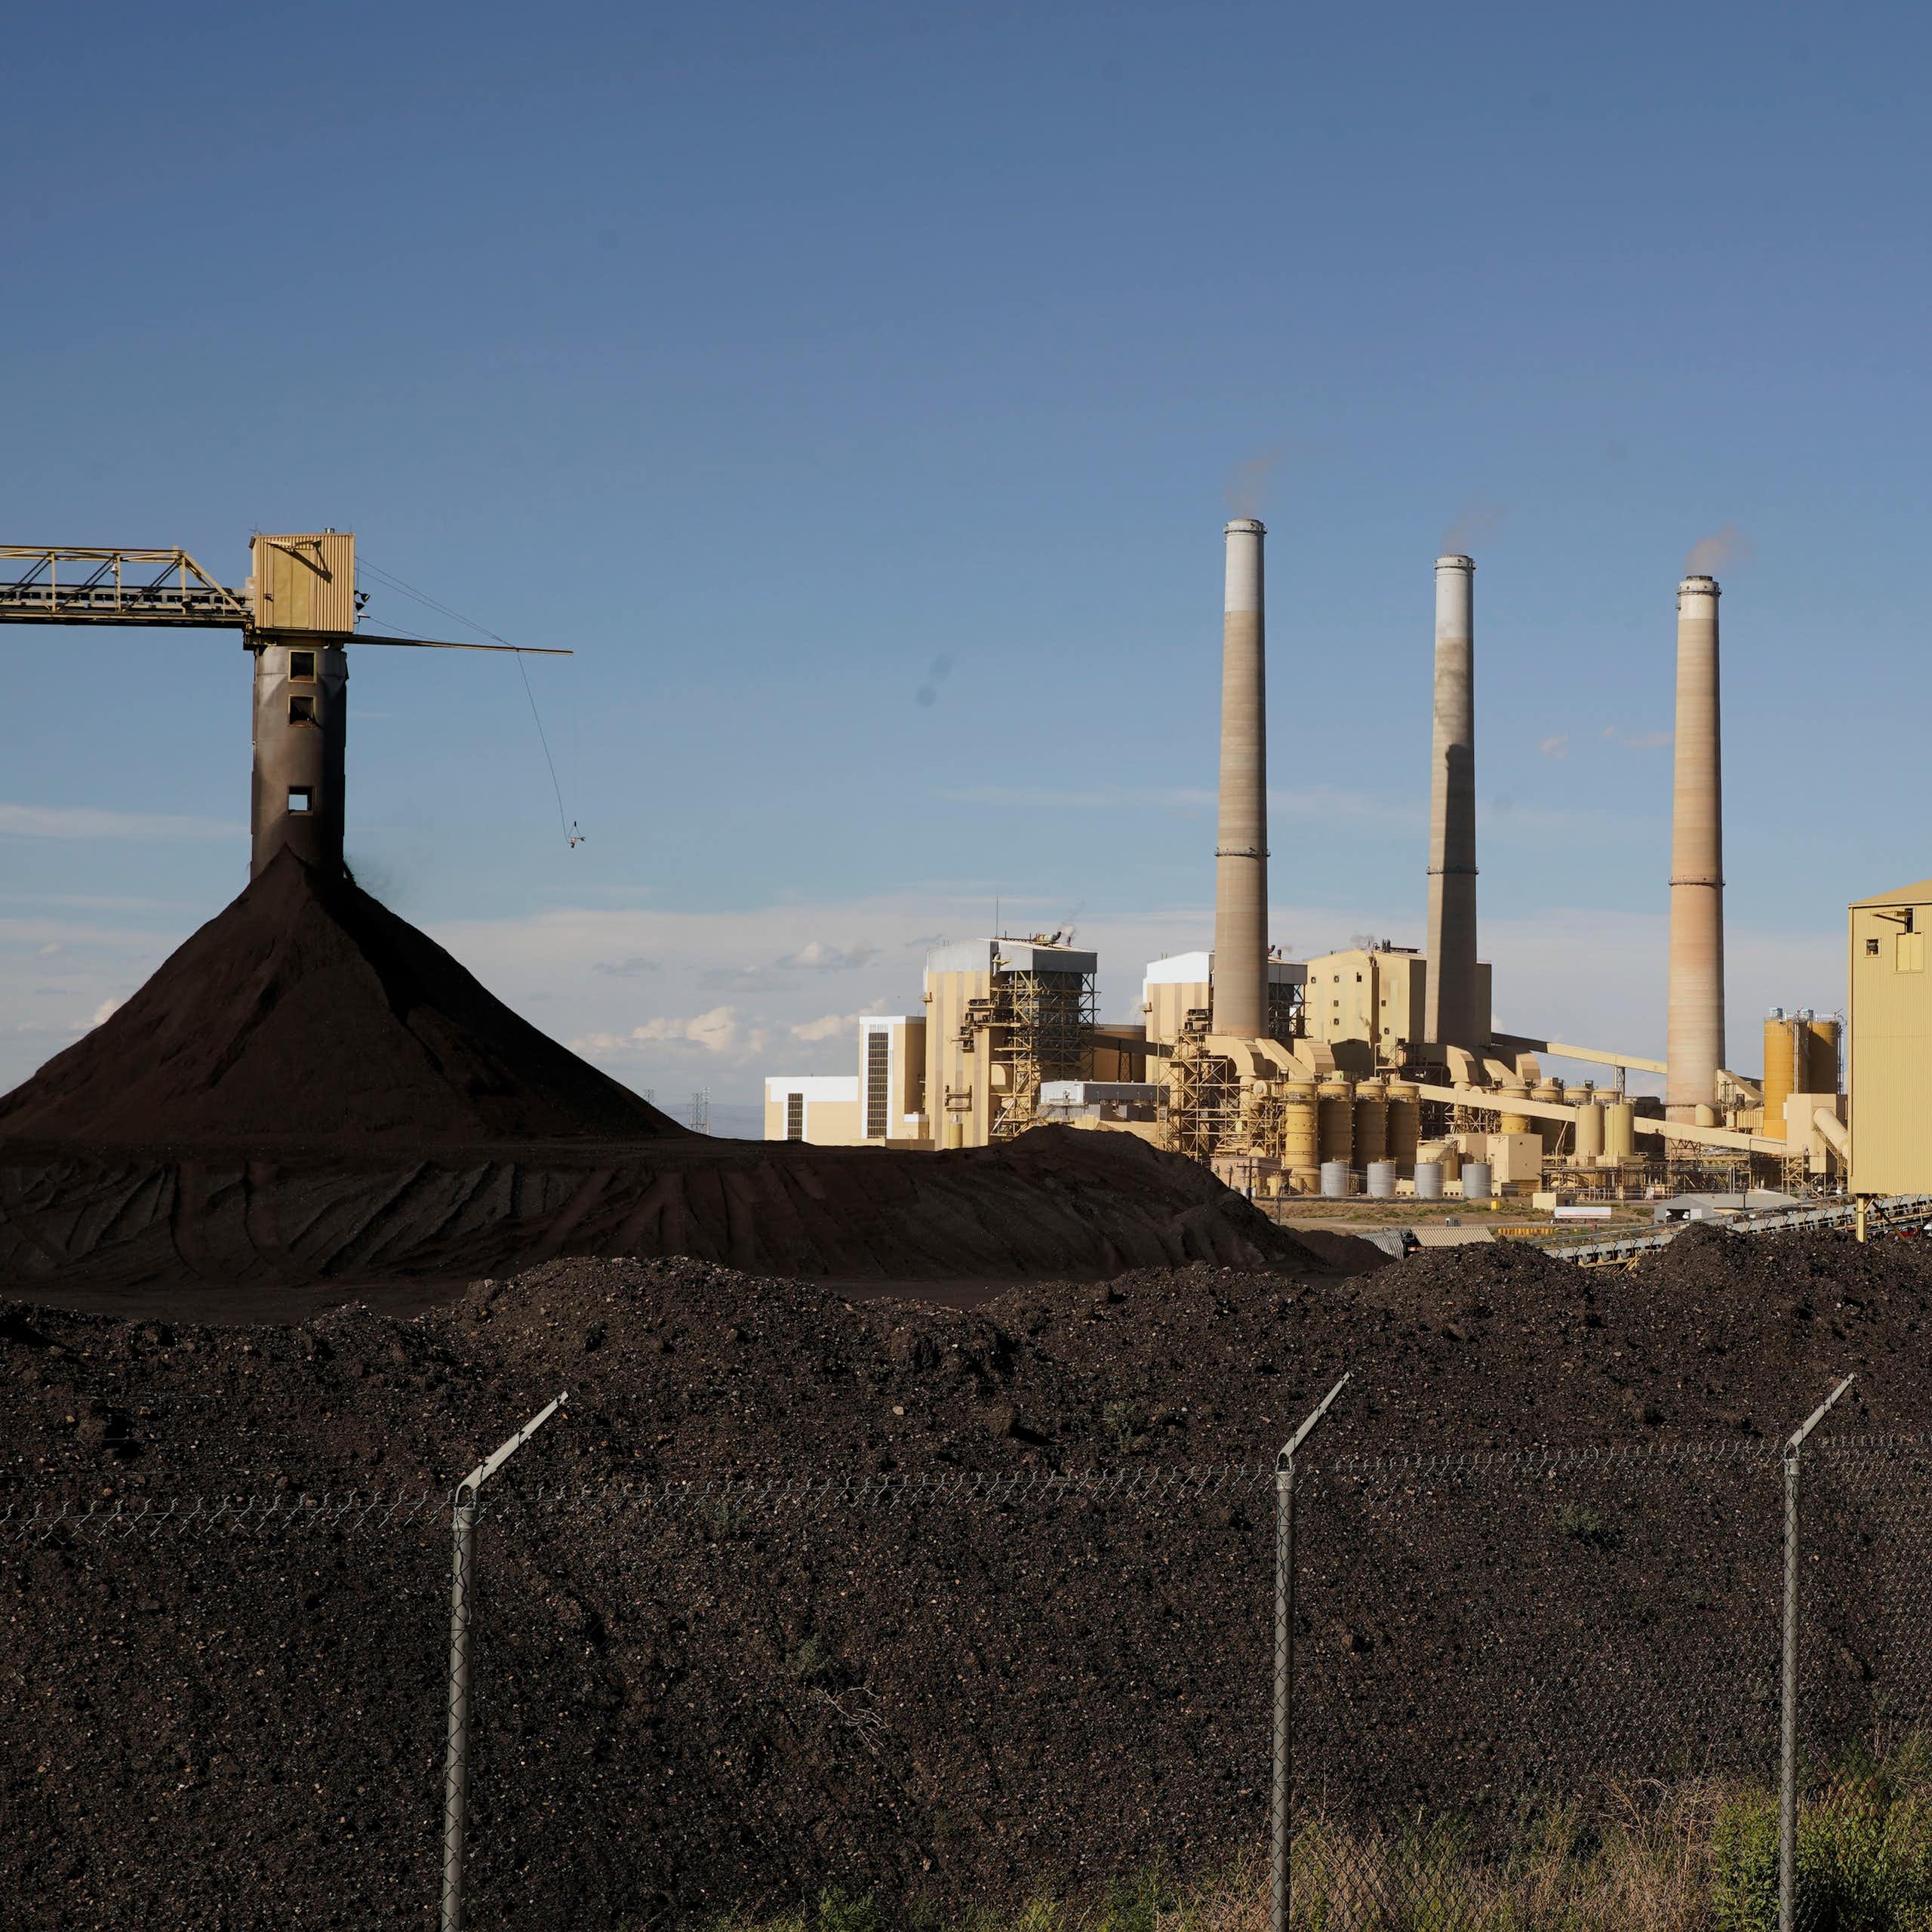 heaps of coal in front of a power plant with three tall smokestacks